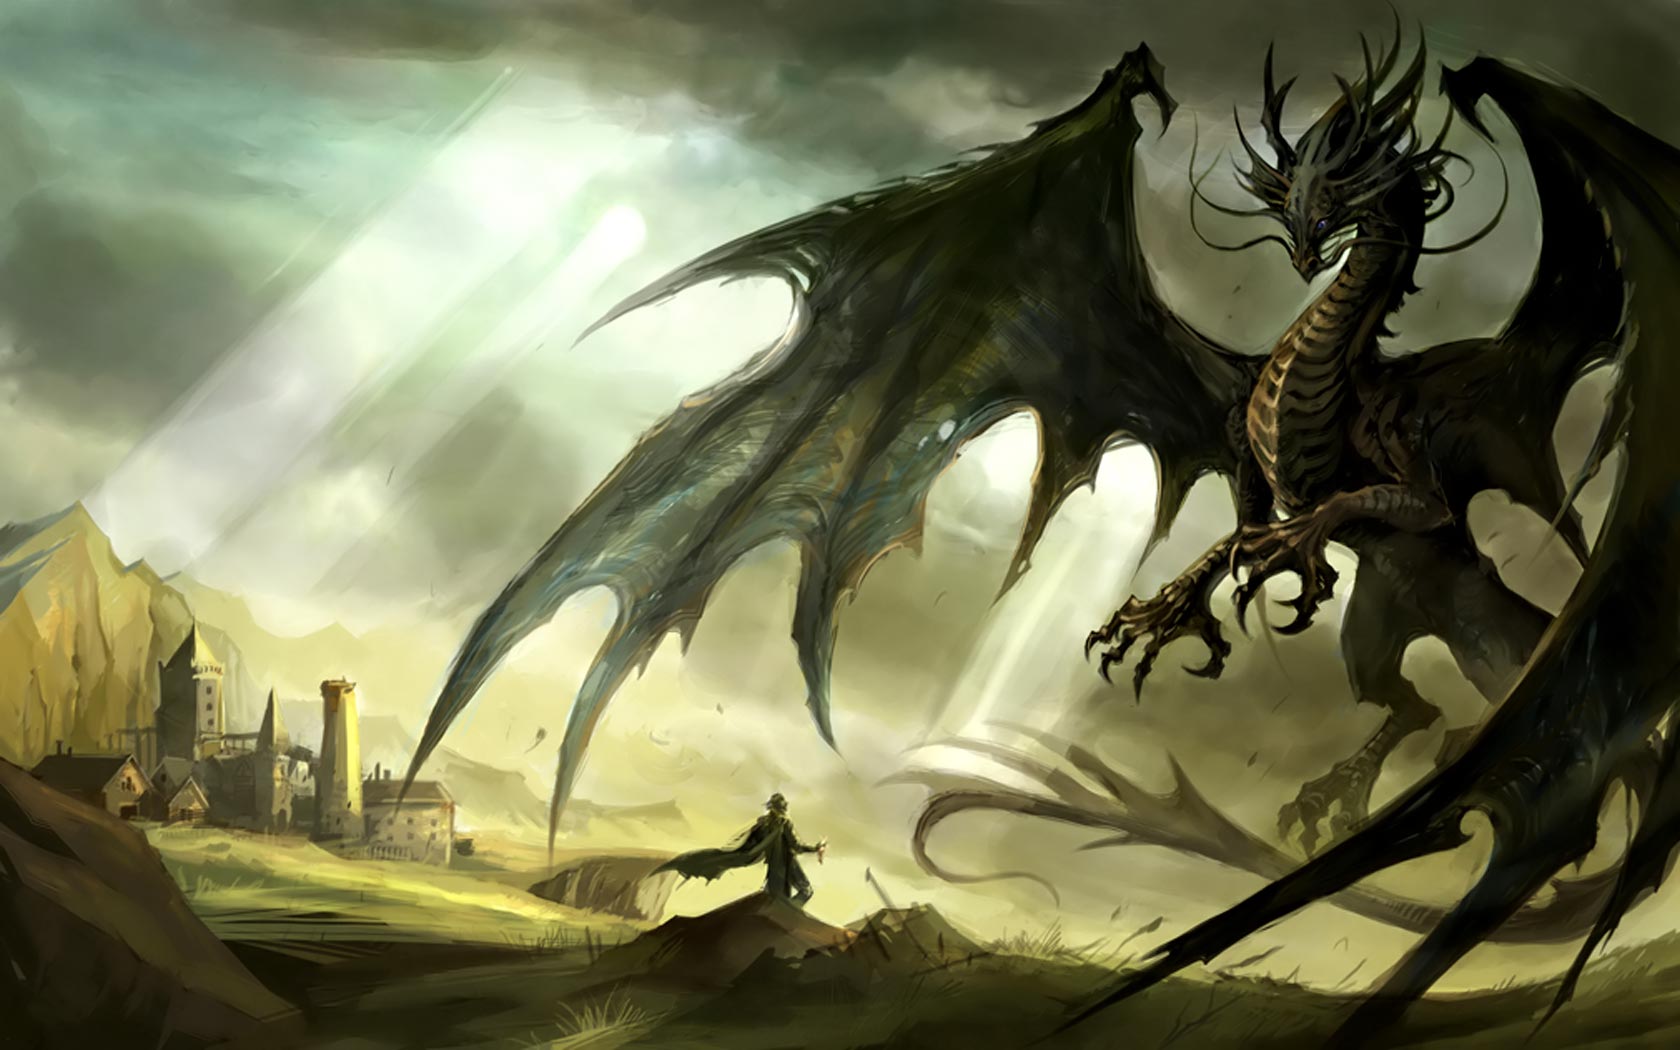  Dragon and Knight backgrounds Wallpaper and make this wallpaper for